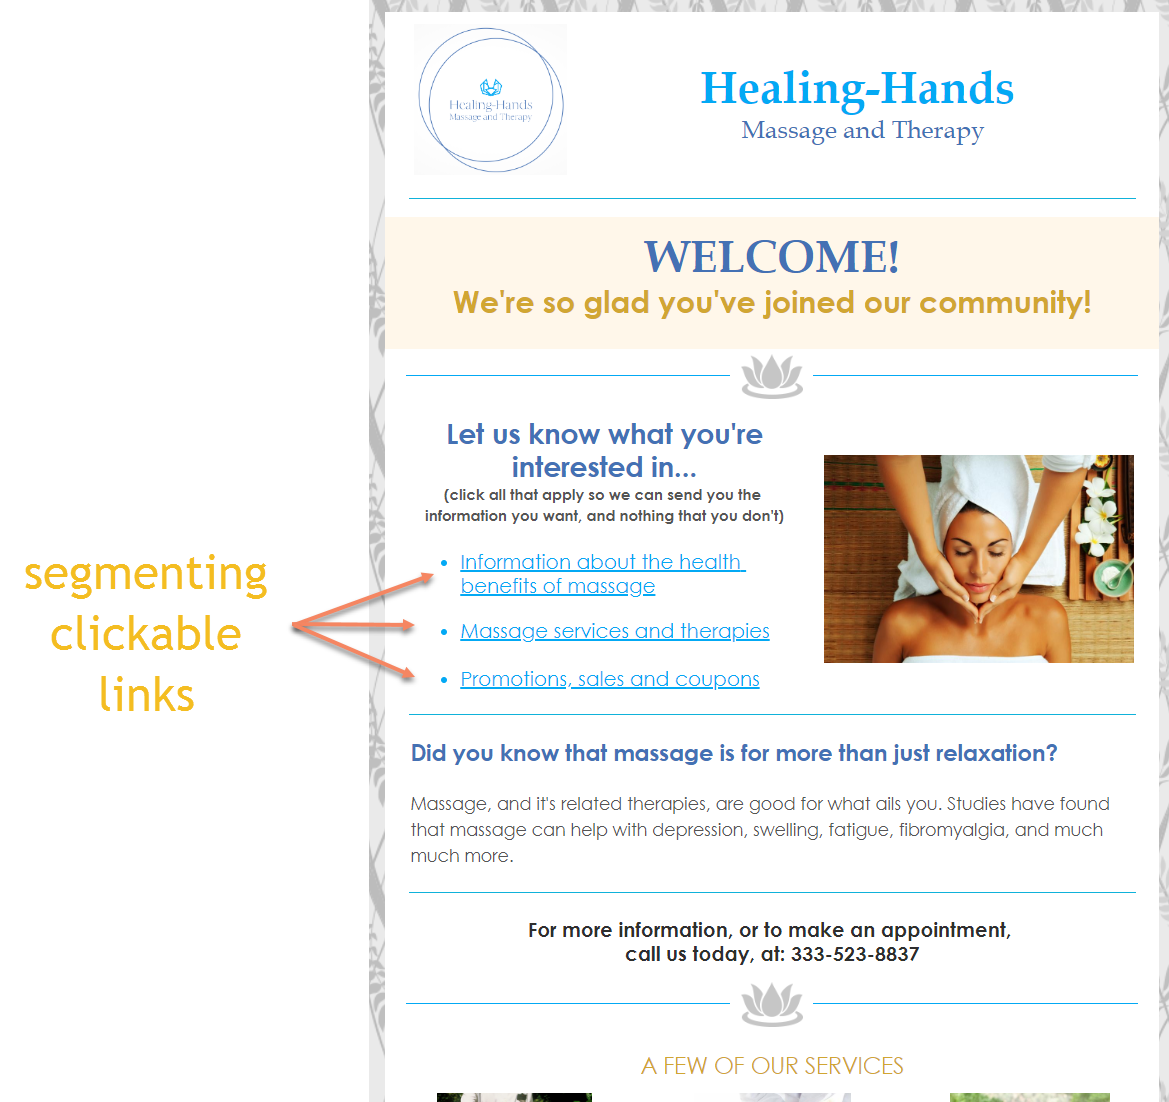 An example of a welcome email that included segmenting clickable links.